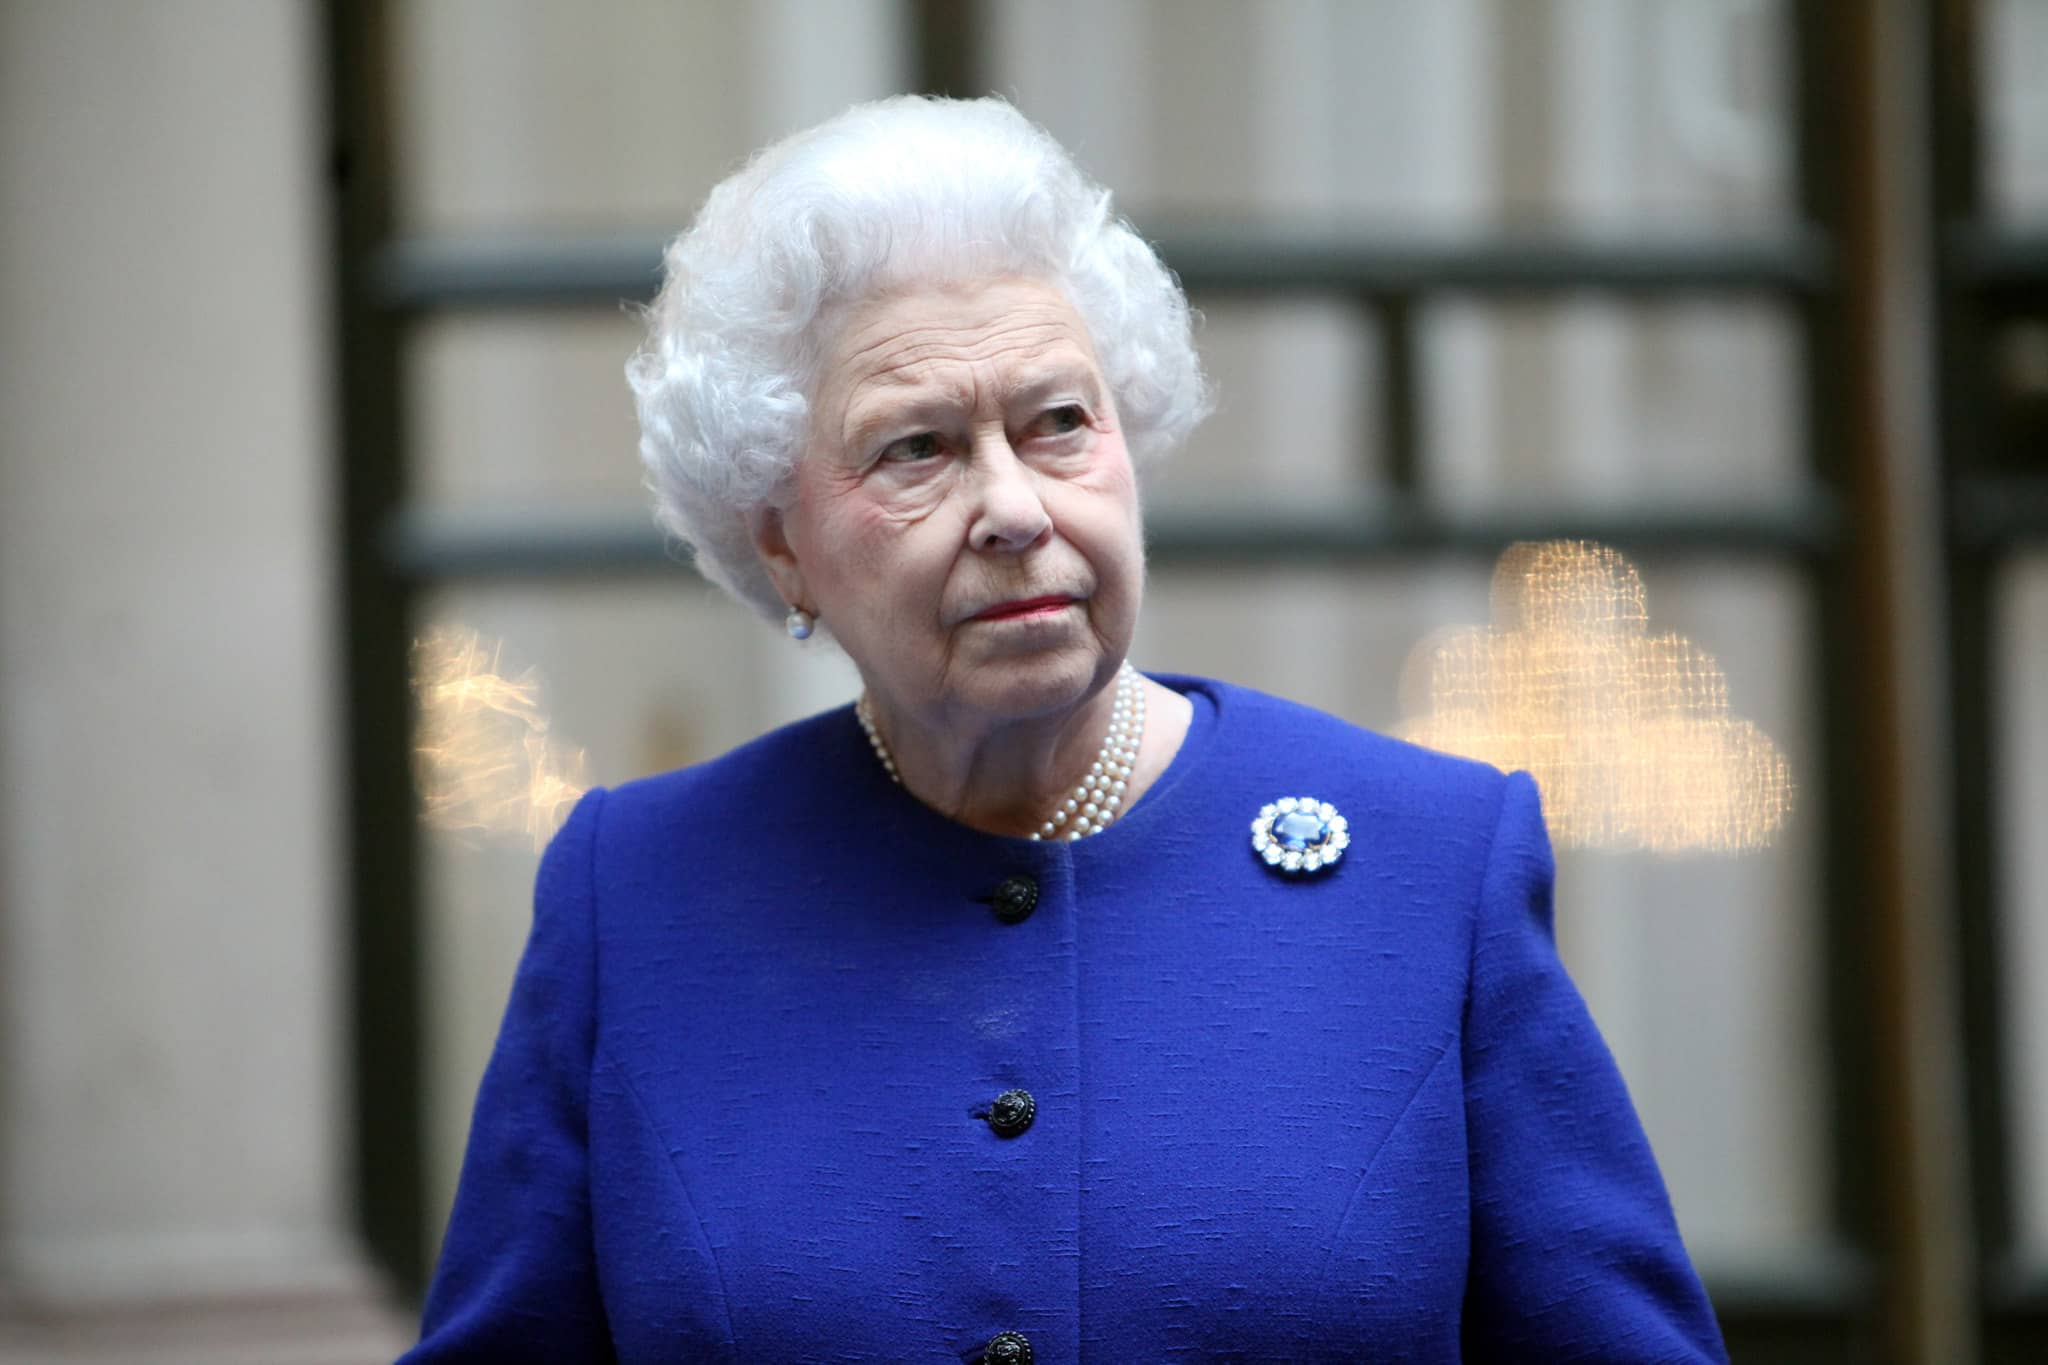 HM The Queen, dressed in royal blue